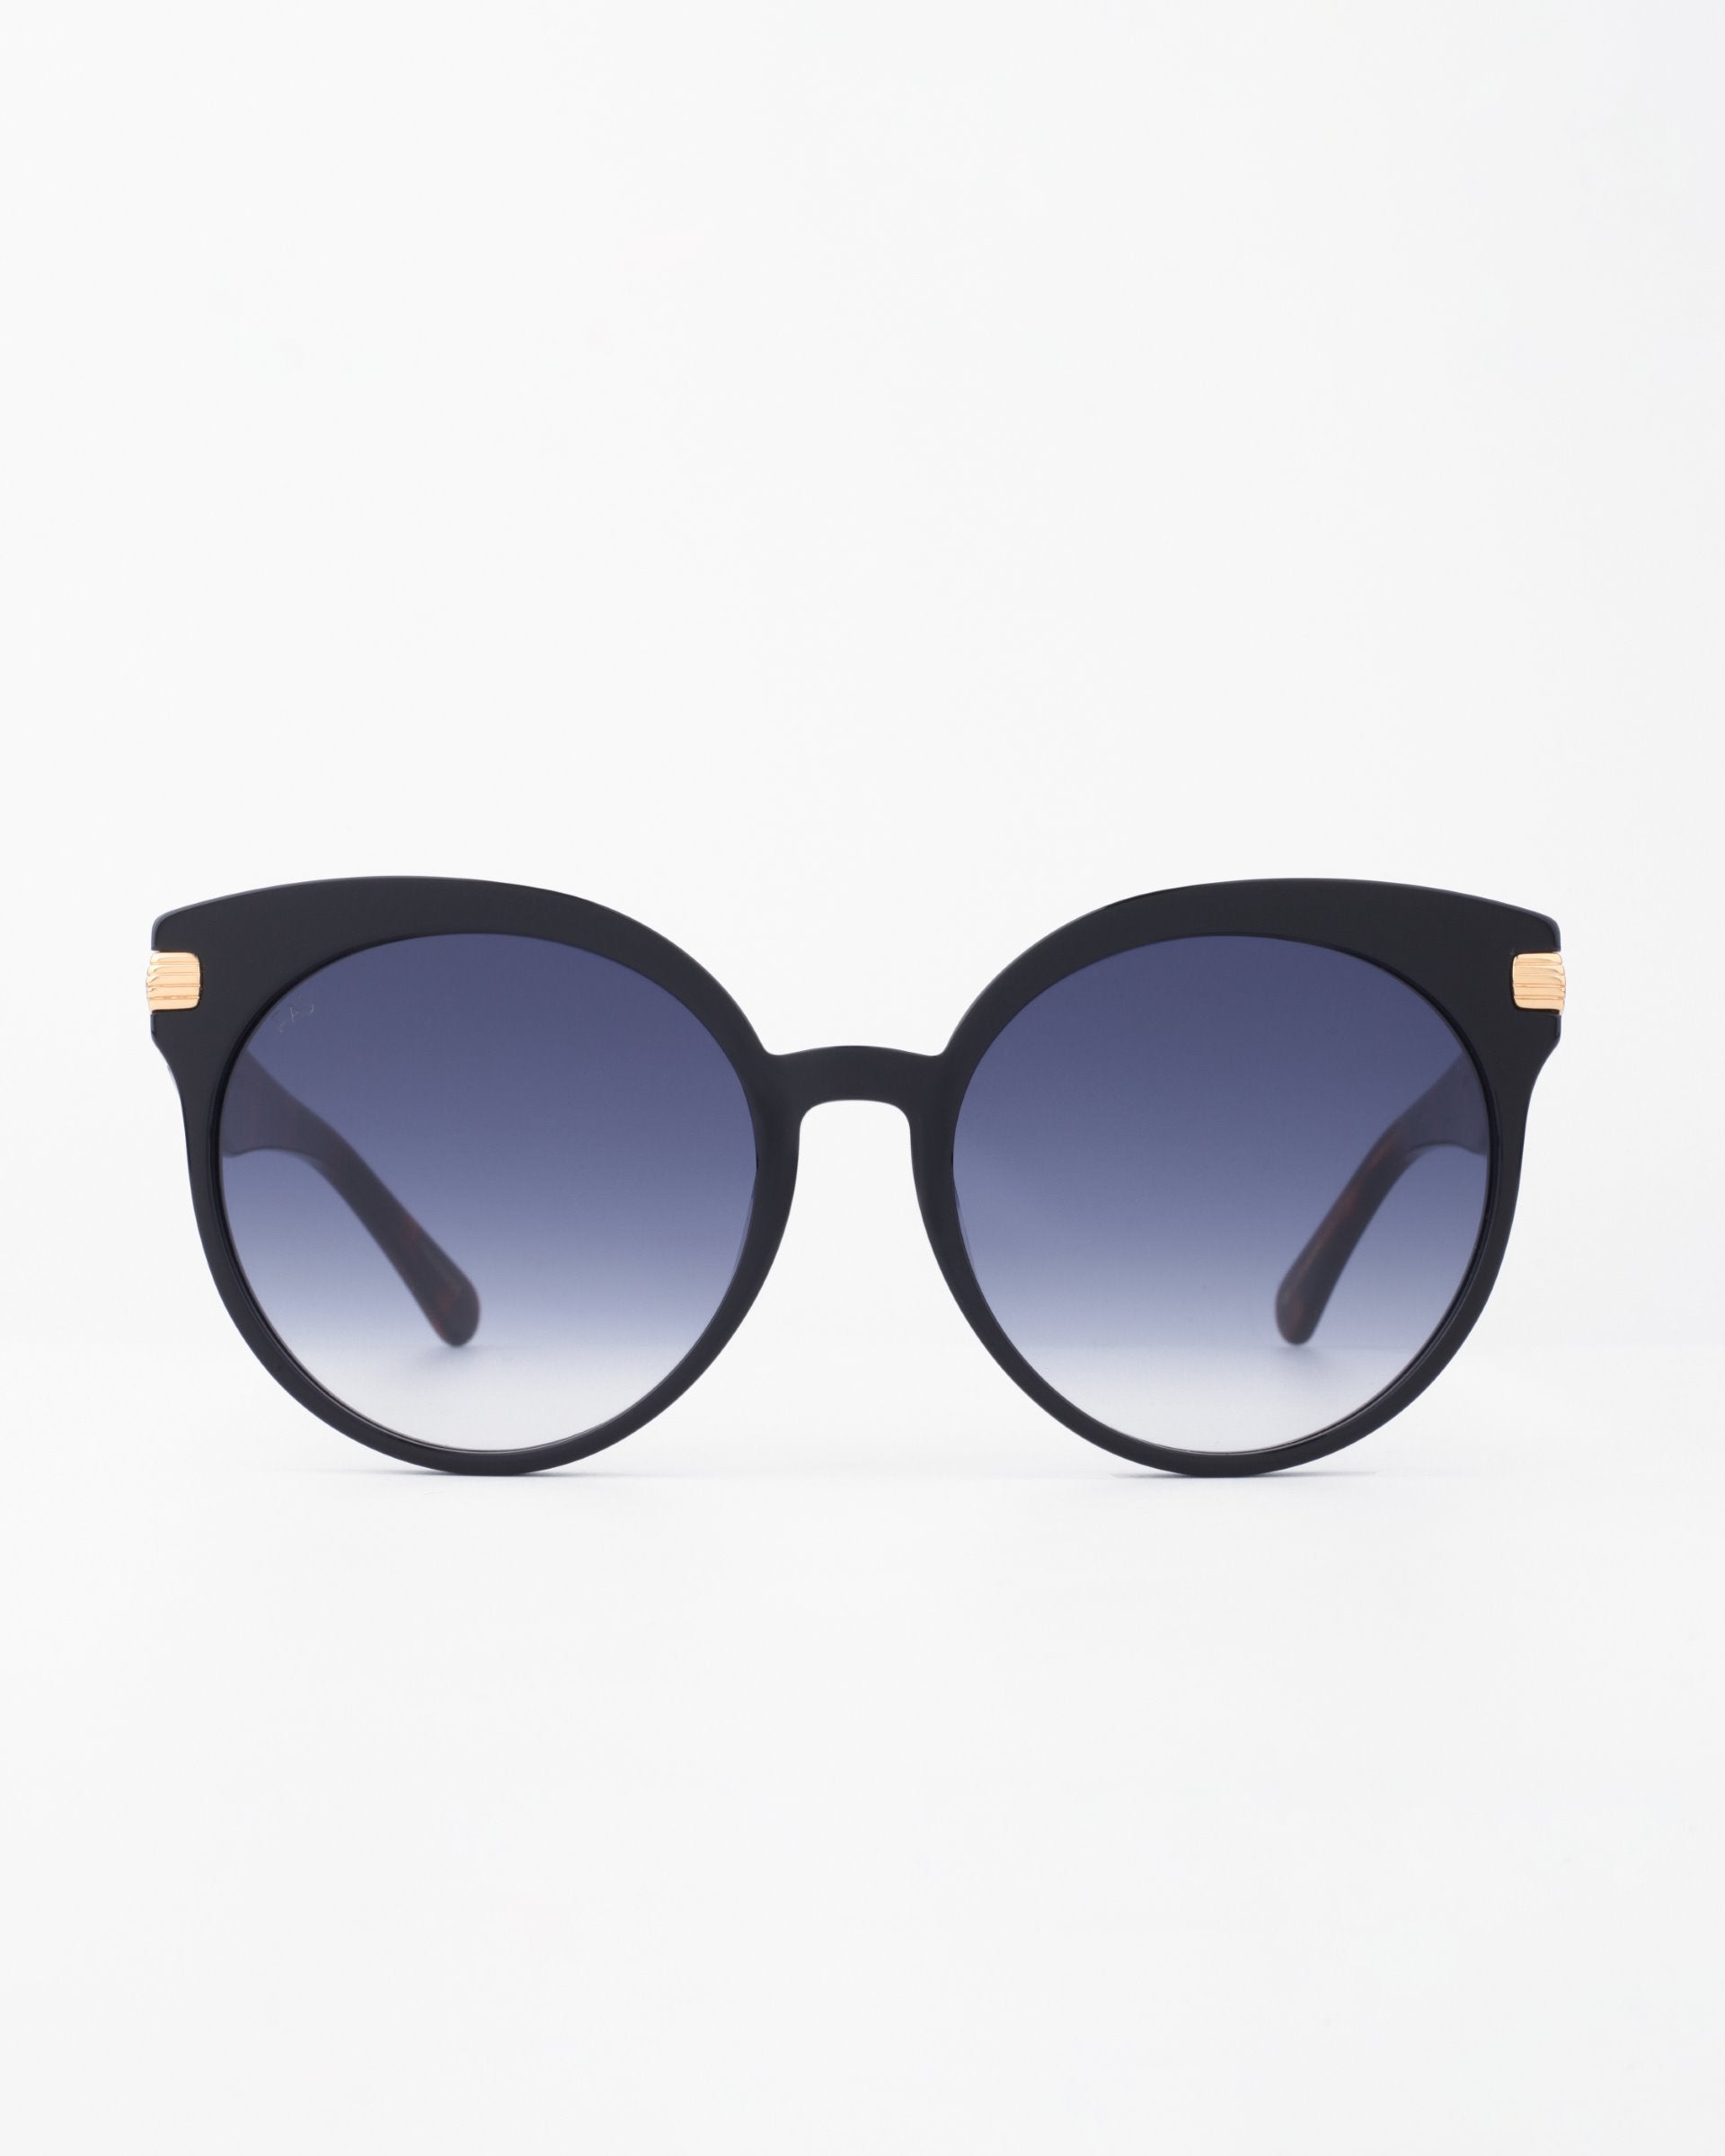 A pair of For Art&#39;s Sake® Muse sunglasses with round, shatter-resistant nylon lenses that transition from dark at the top to lighter at the bottom. The arms, crafted from handmade plant-based acetate, feature an 18-karat gold-plated temple near the hinges. The background is plain white.